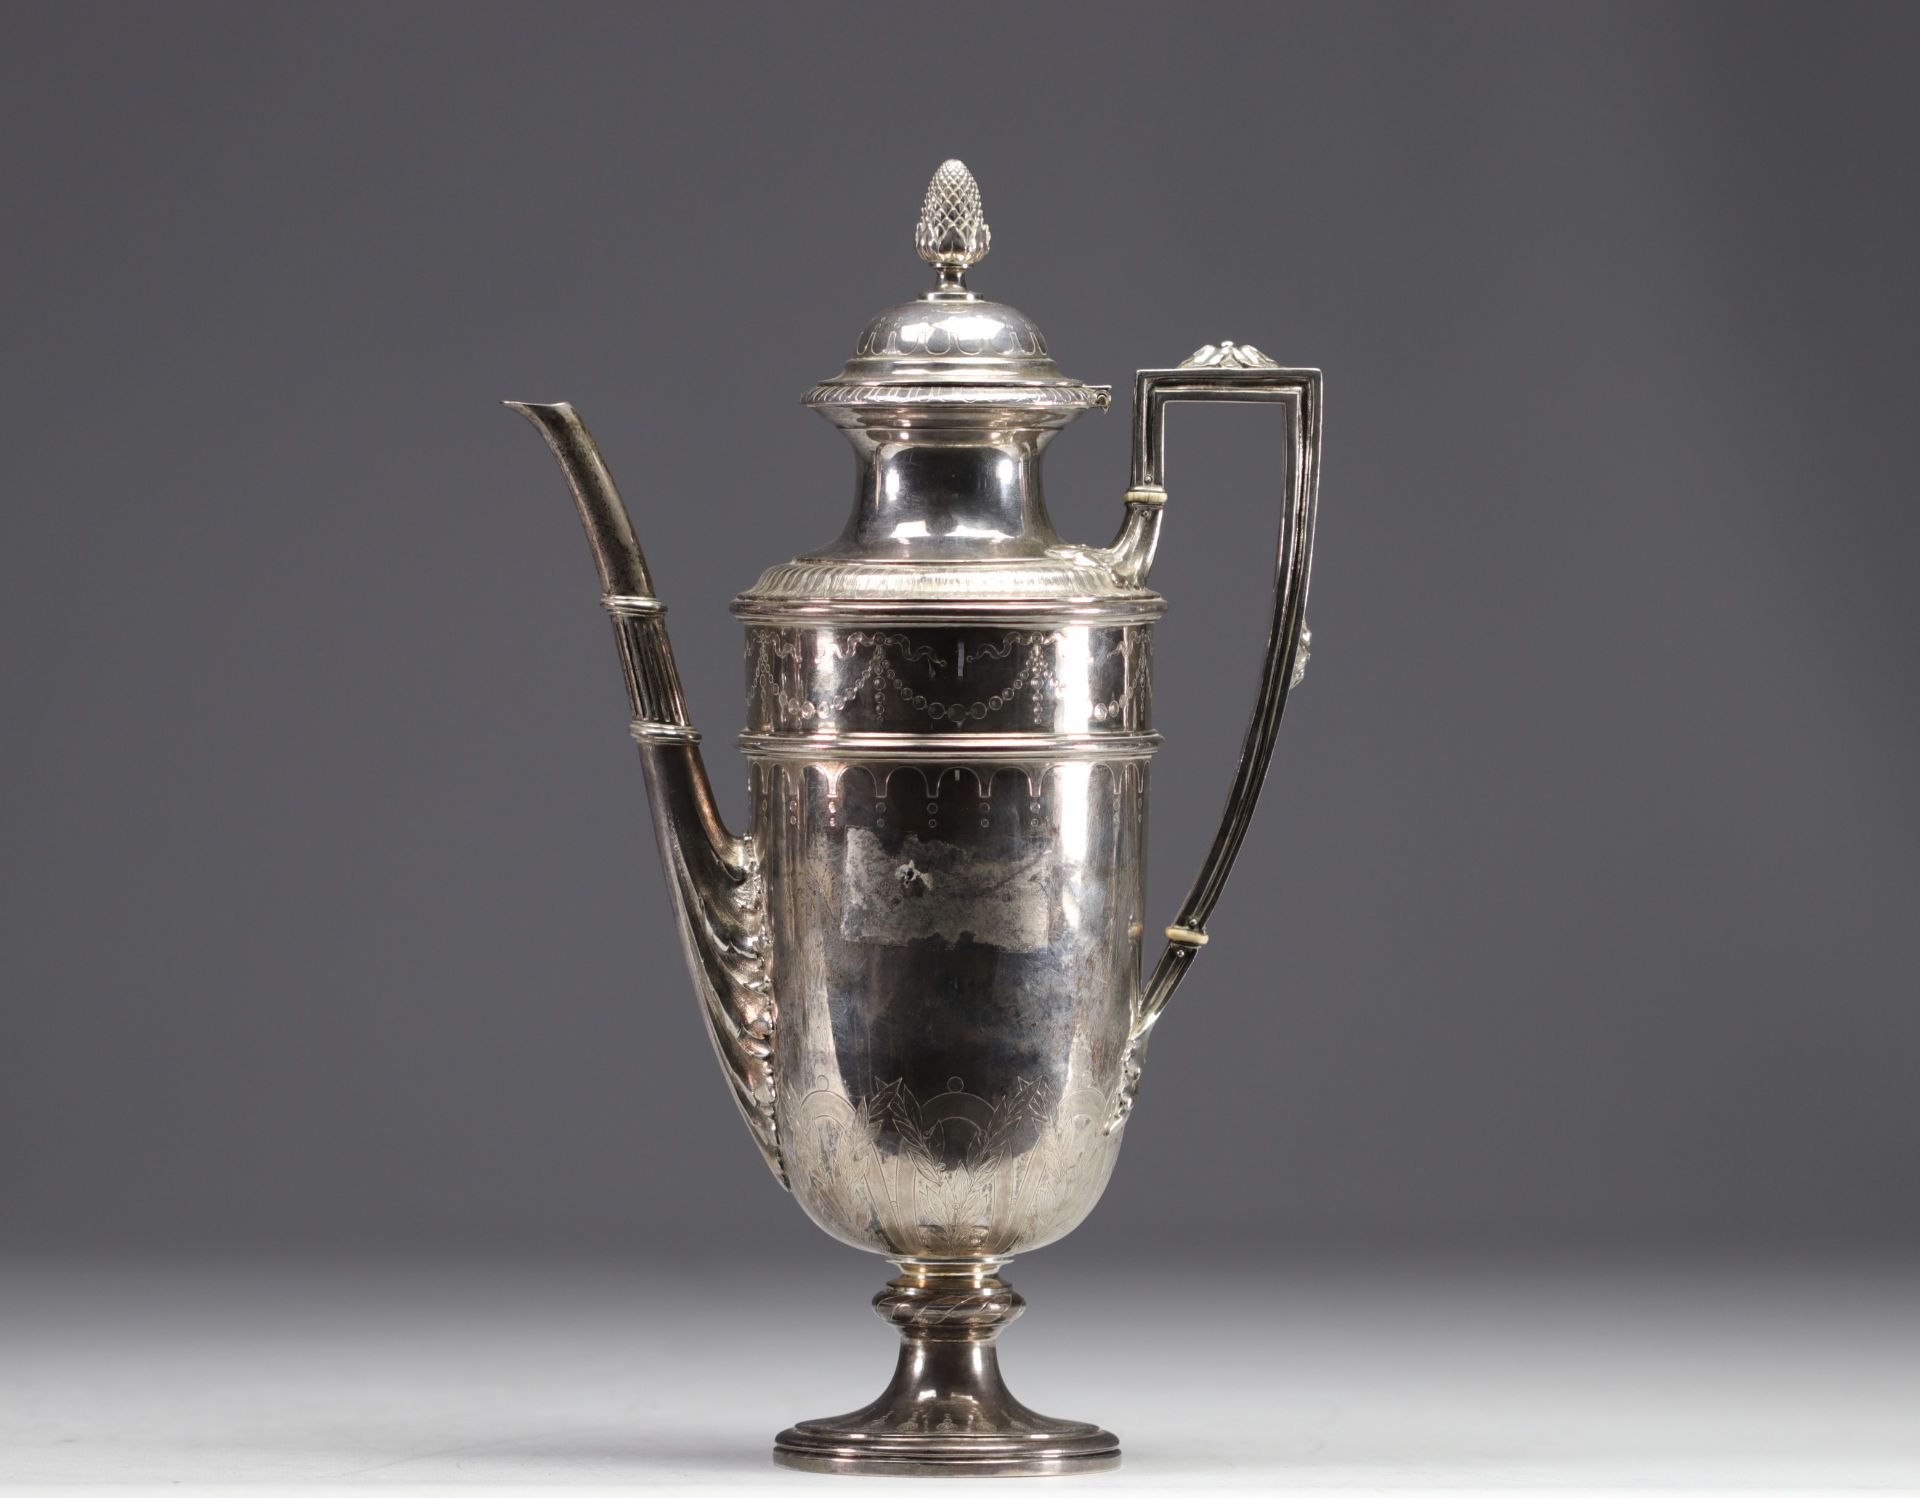 Jean-Baptiste Claude ODIOT a PARIS - Solid silver coffee service. - Image 3 of 11